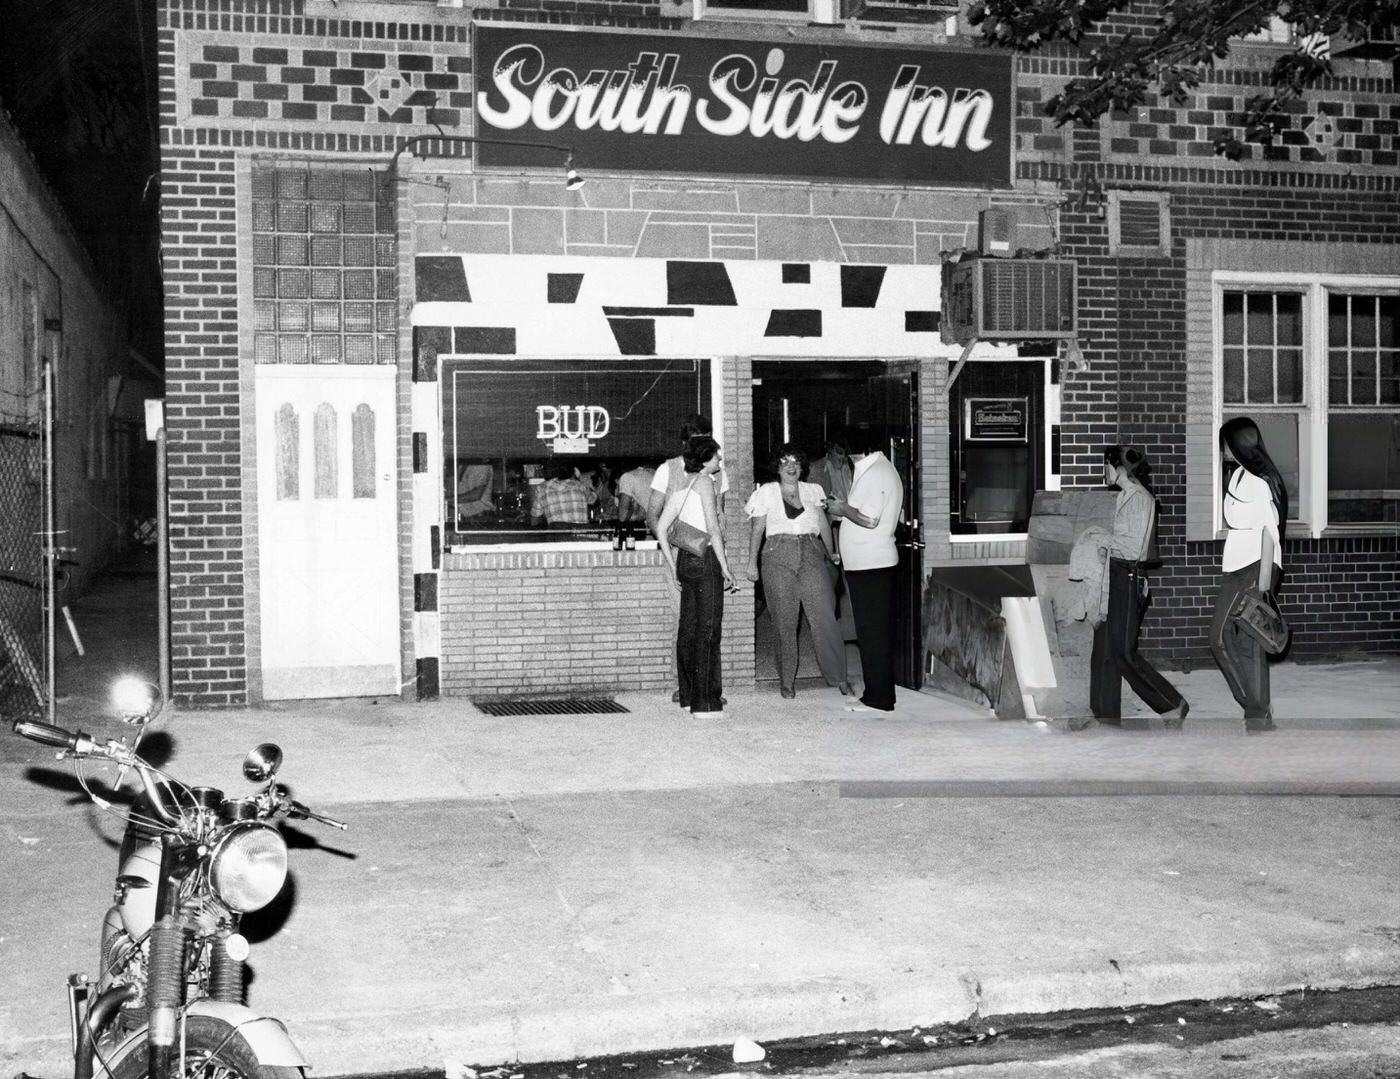 The South Side Inn In Ozone Park, Queens, 1978.